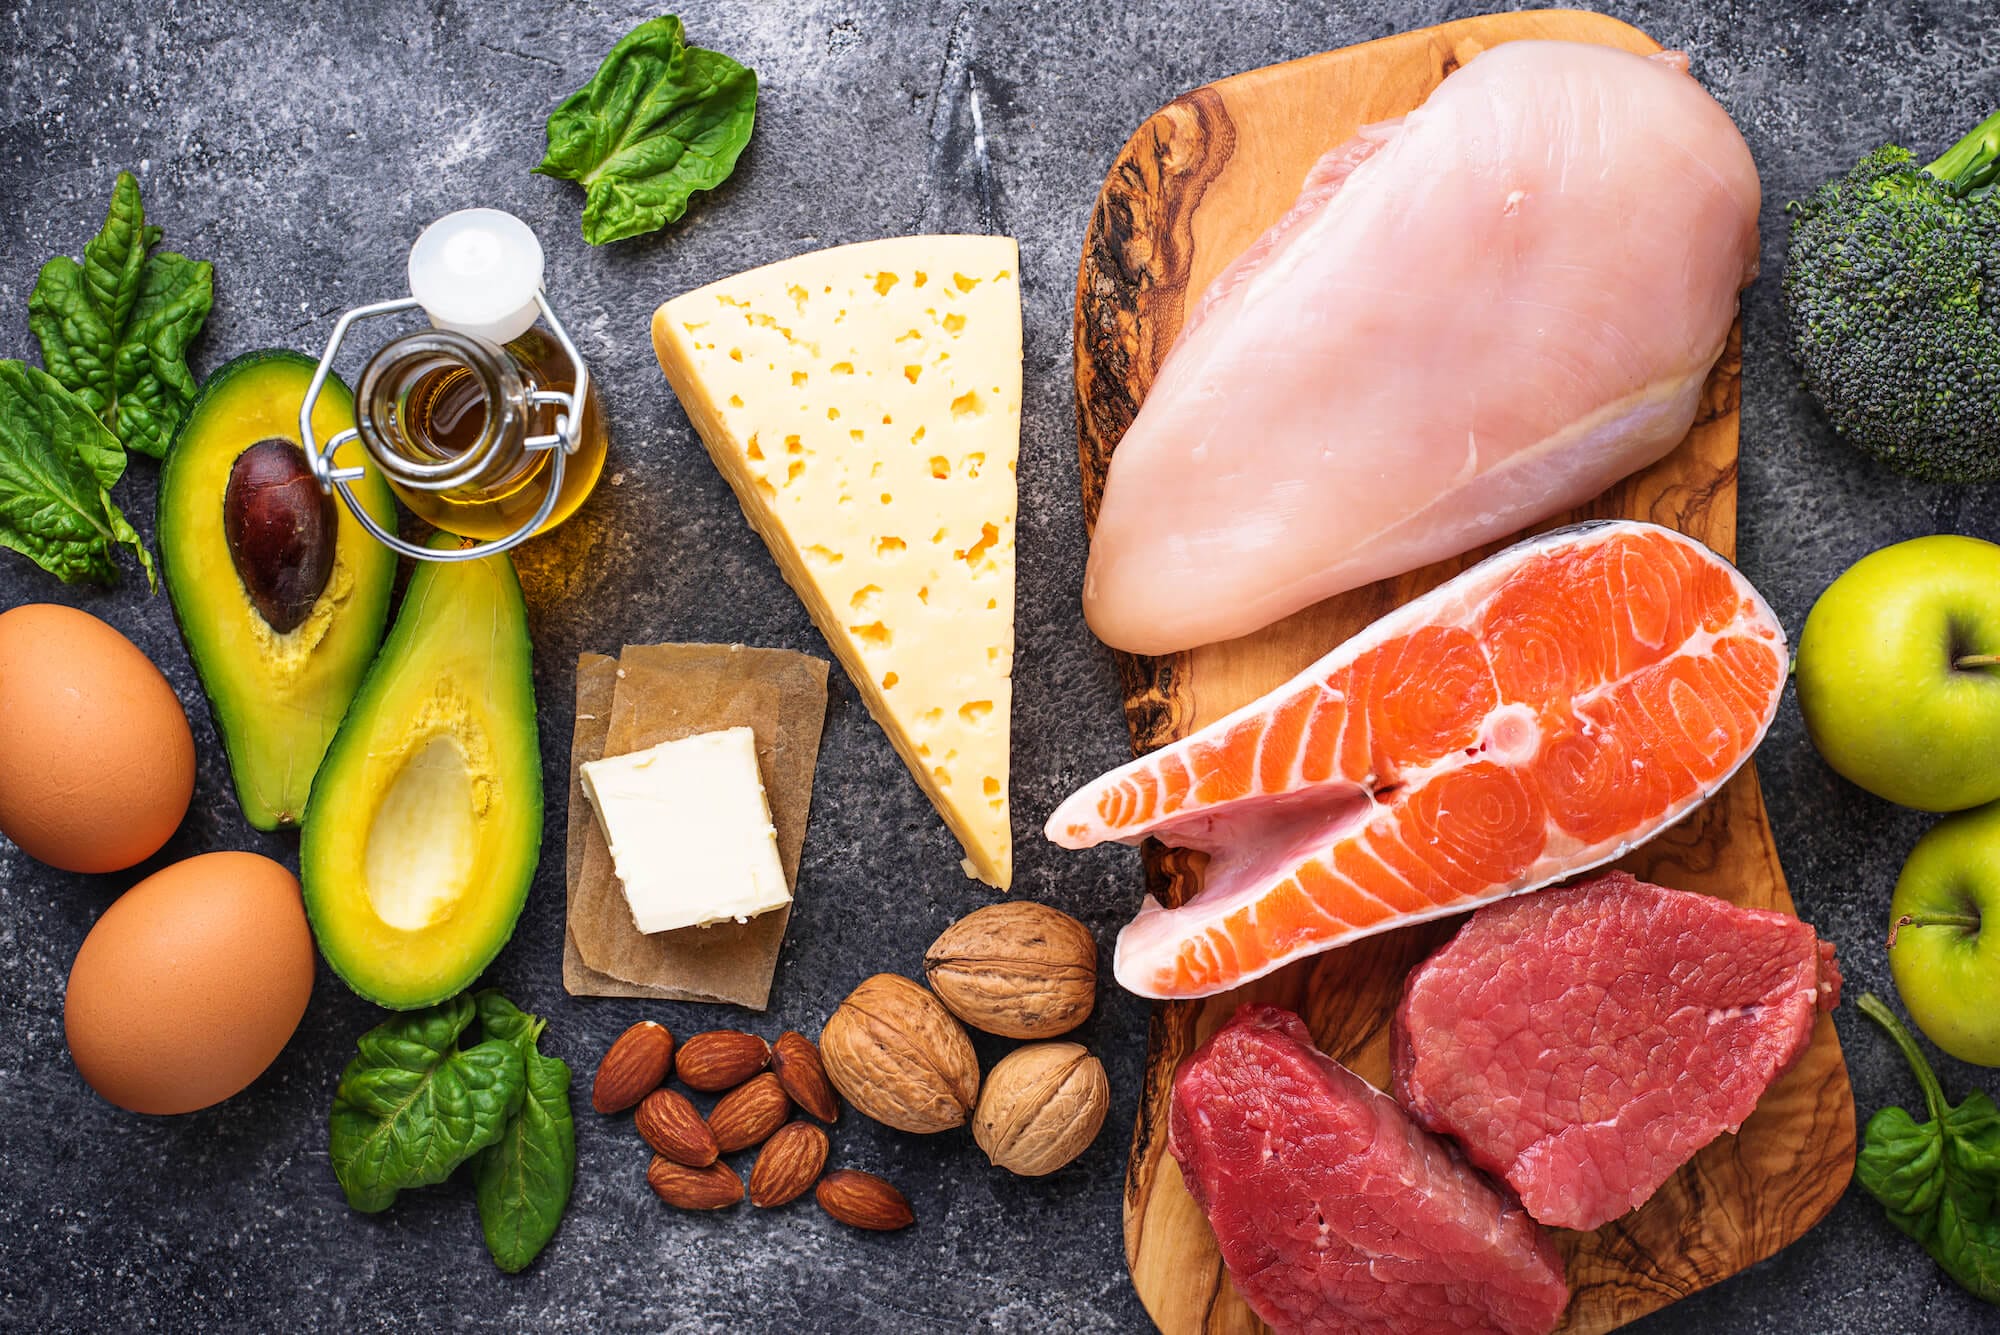 Meat, seafood, eggs and dairy are excellent sources of healthy protein and fat.